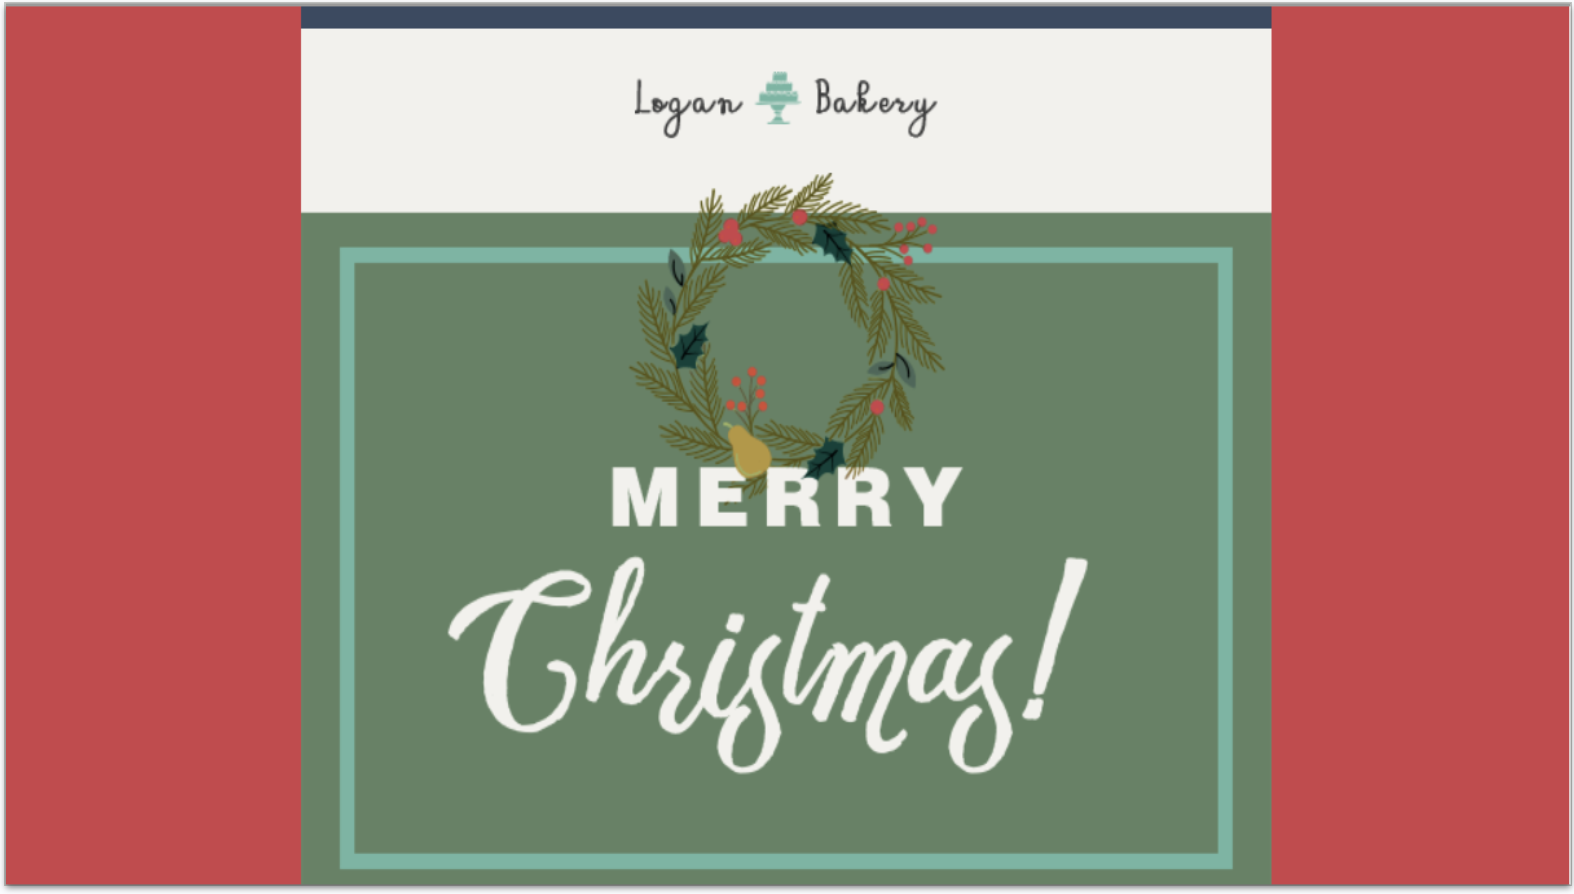 The Christmas Greeting email template from Constant Contact